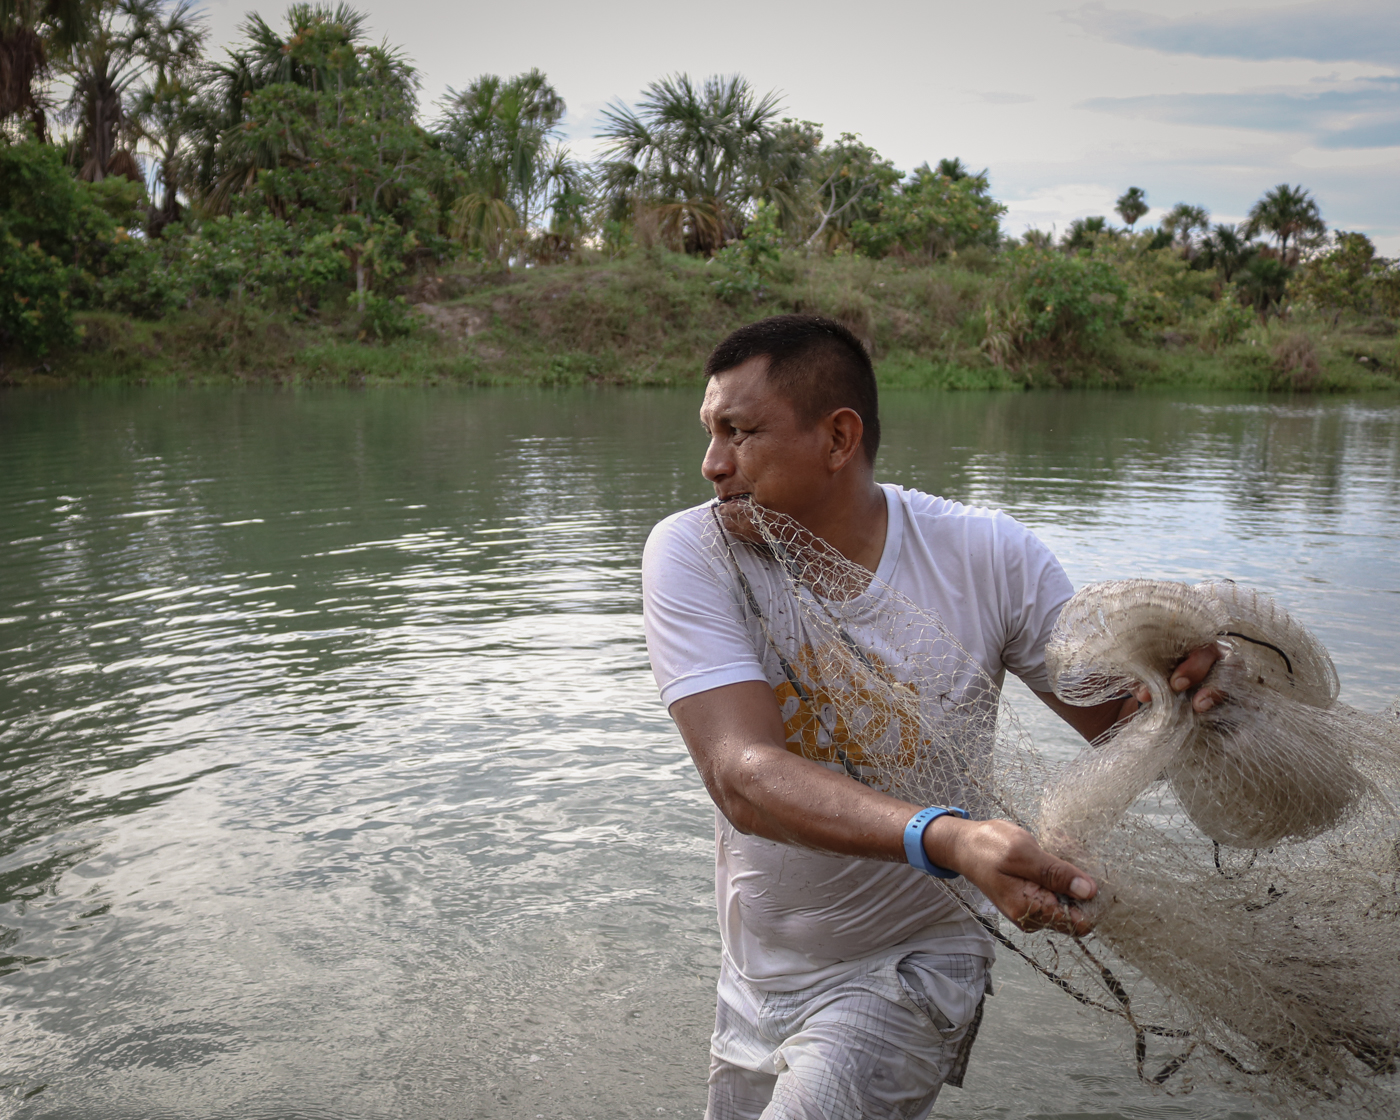 “The first time we tried to raise fish, we put more than 2,000 fry in the pond, and almost all of them died from lack of space,” Silva says. Today, fish farming has become an answer to the problem of how to eat healthy fish, as well as a source of income for the family.